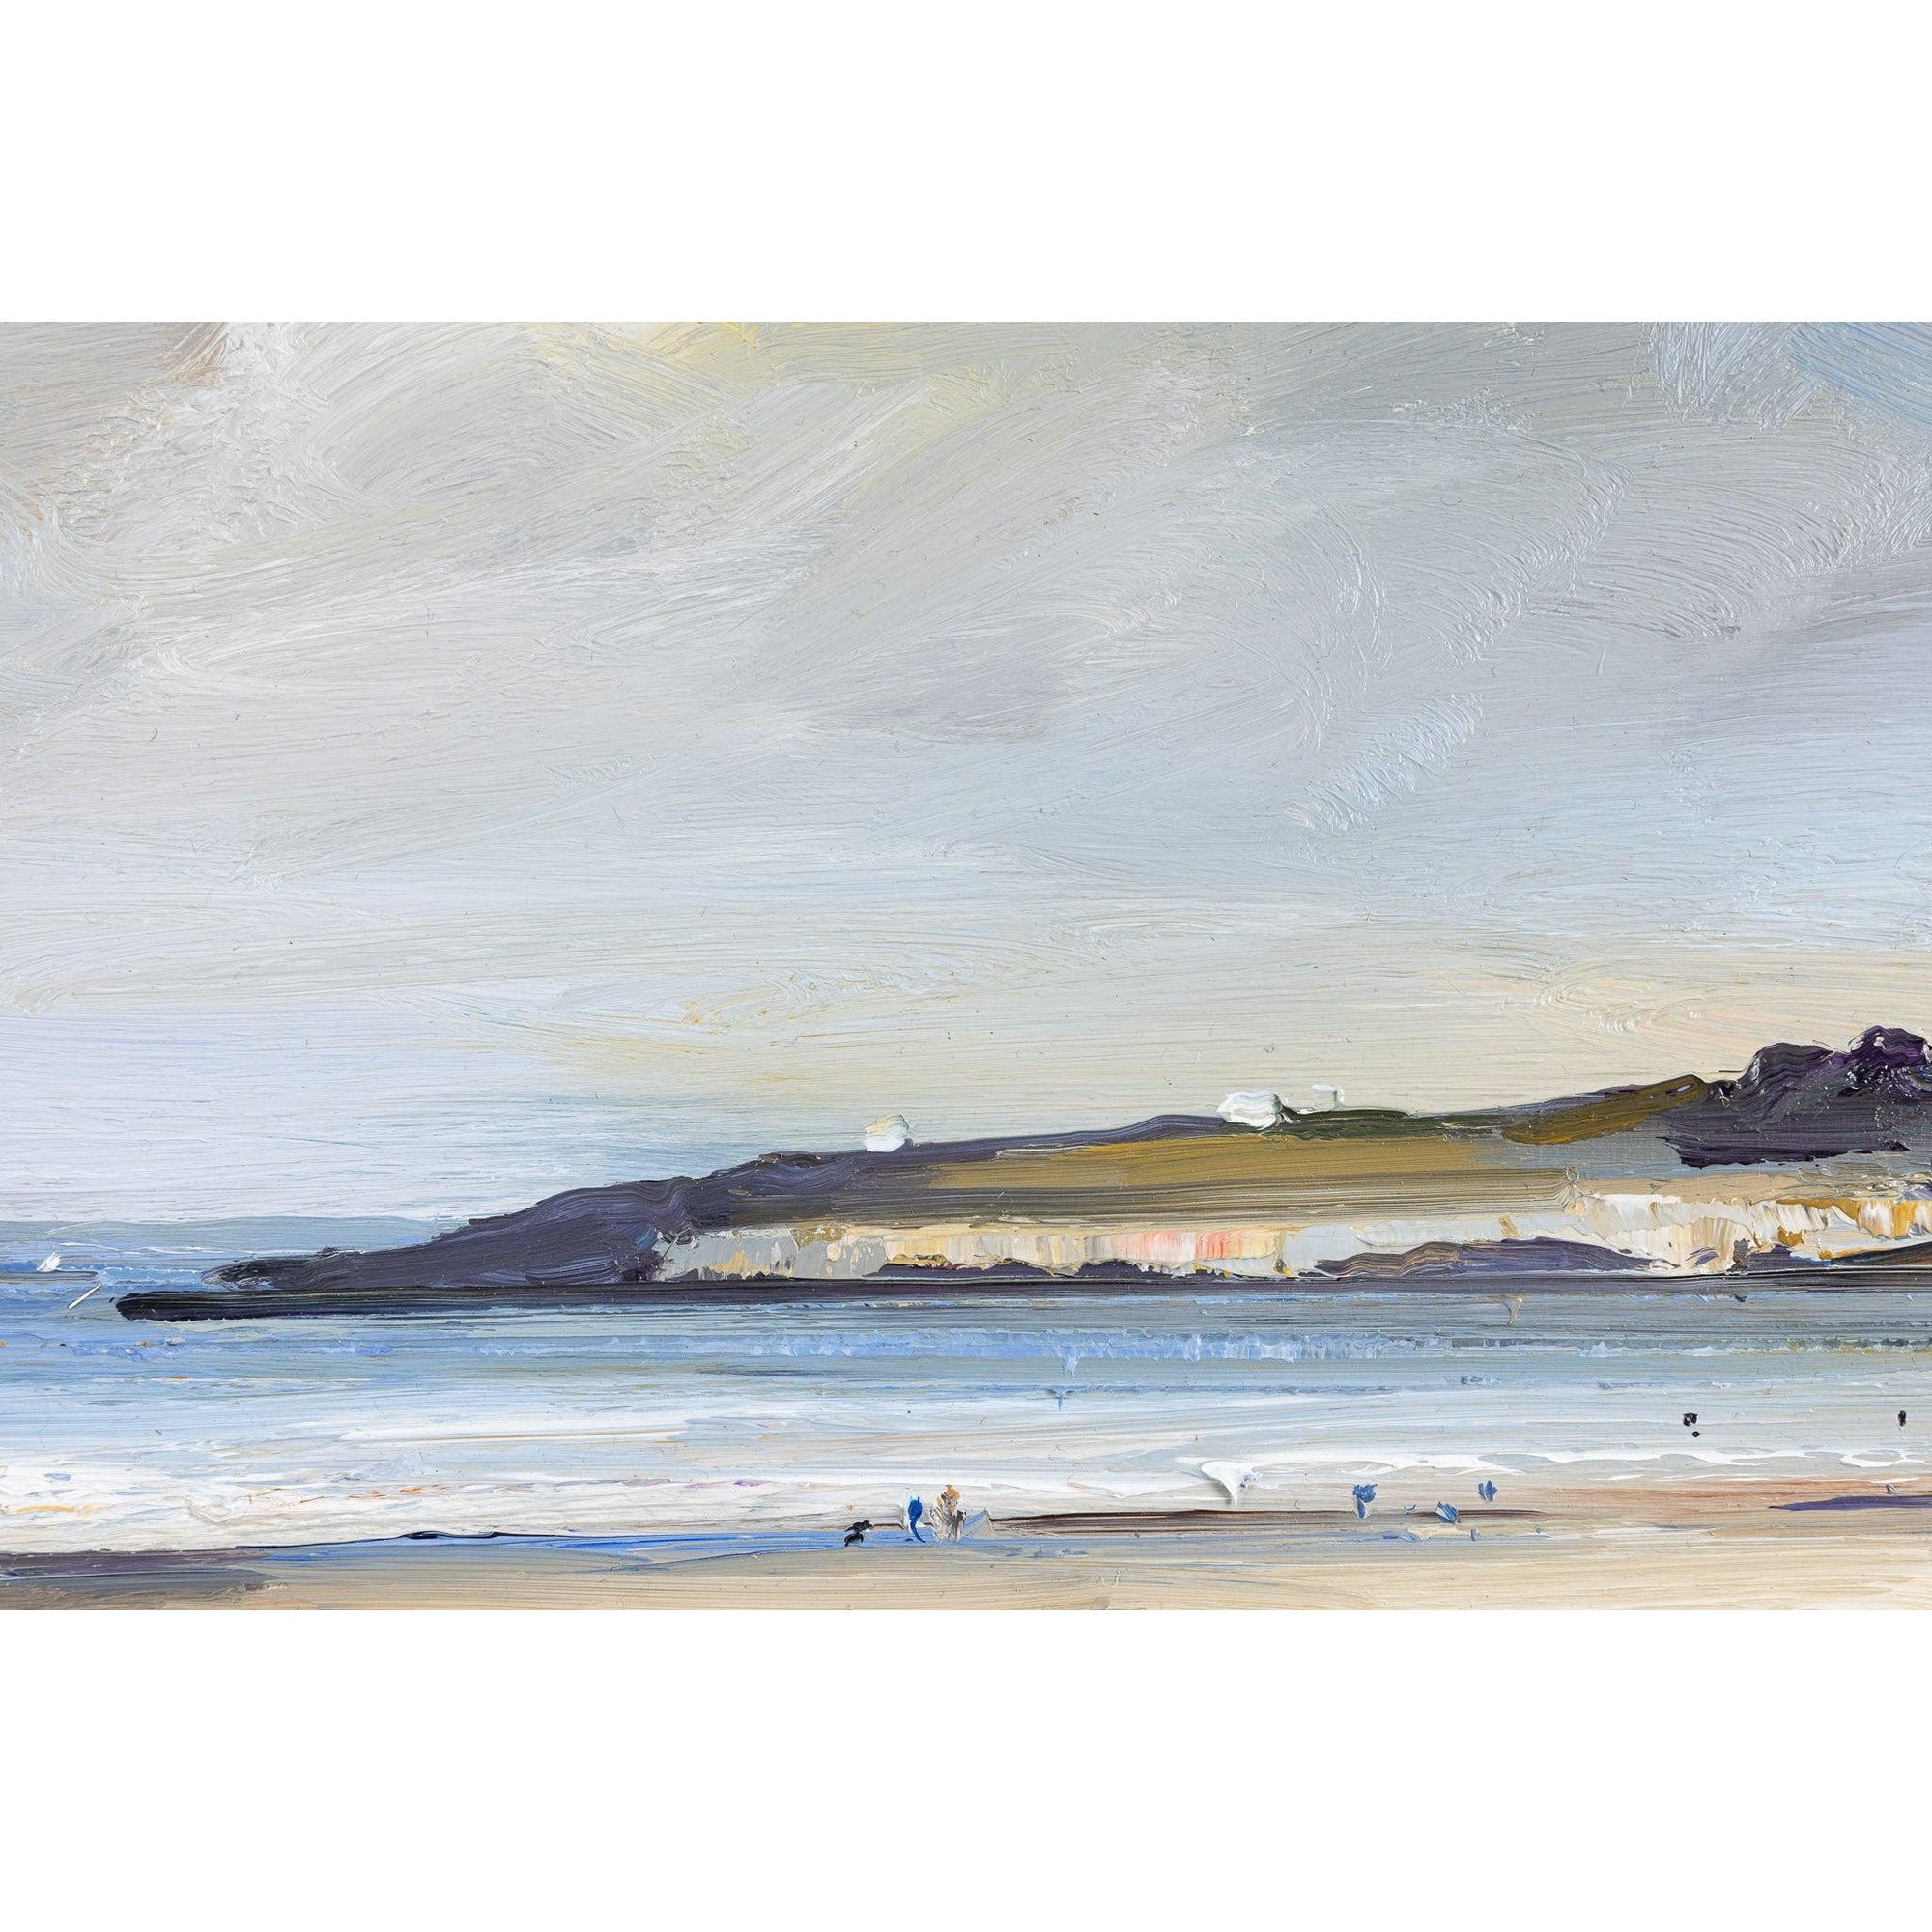 ‘Early Autumn on Daymer Bay' oil on board original by David Atkins, available at Padstow Gallery, Cornwall